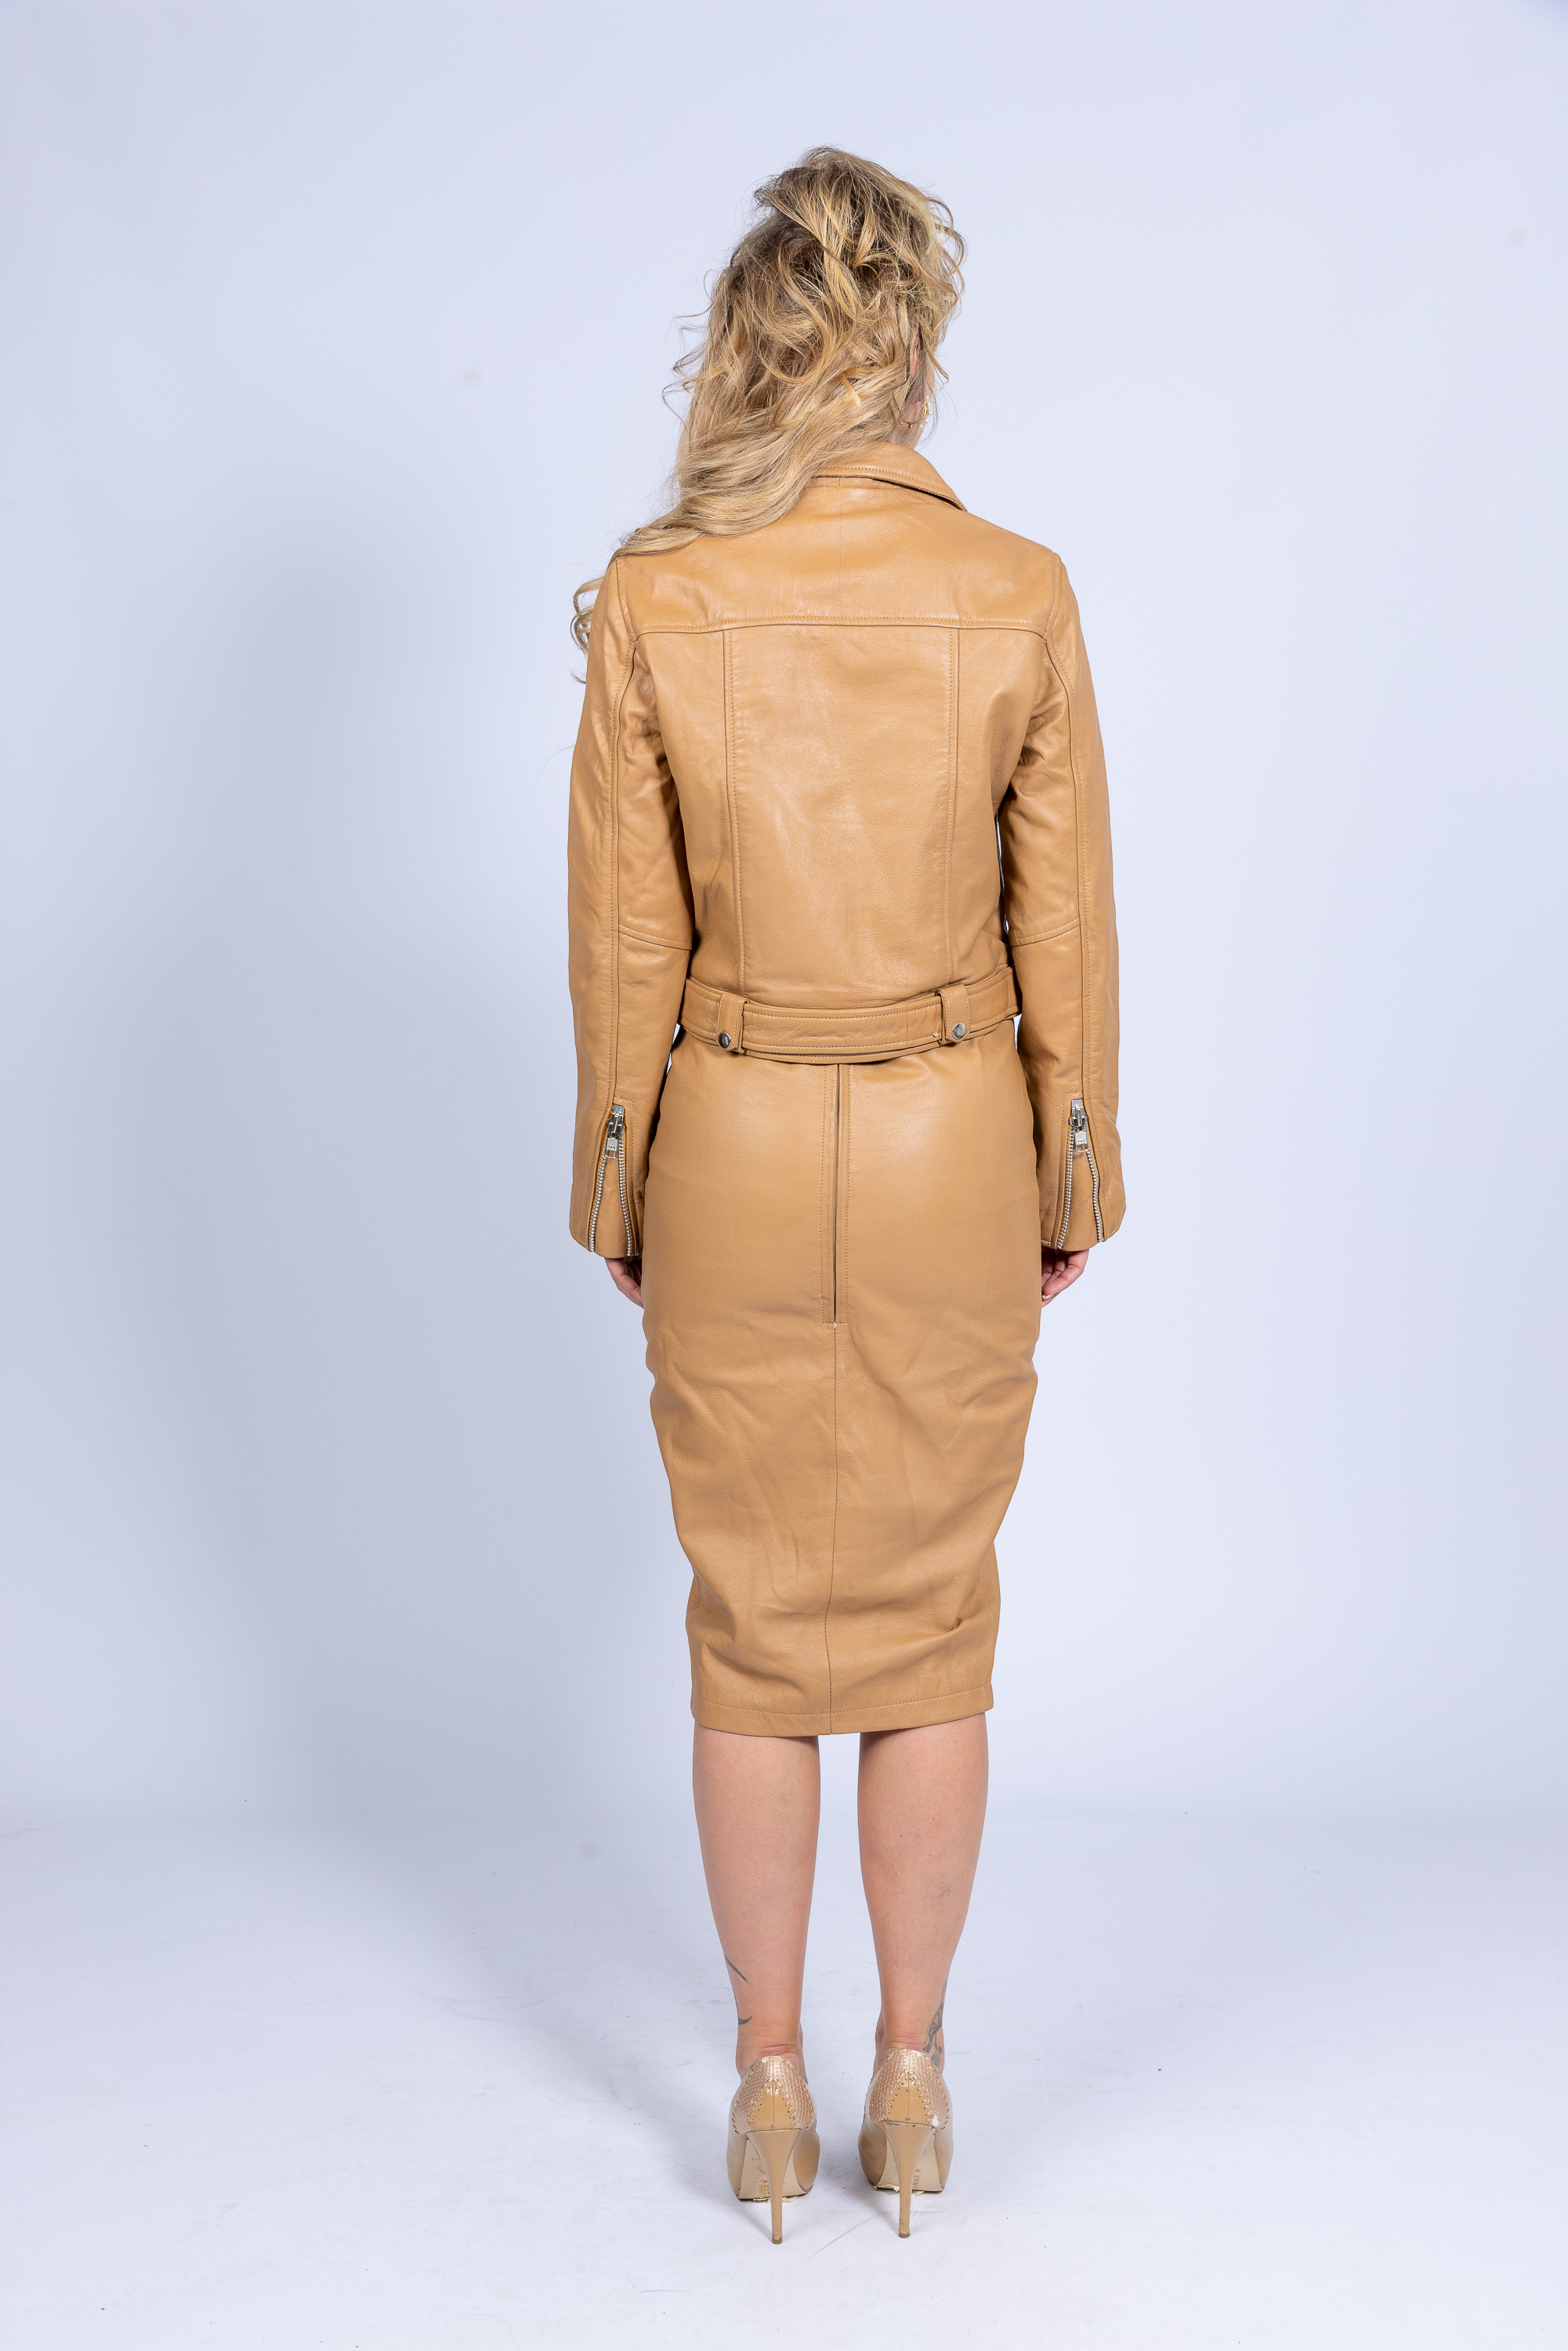 Leather skirt pencil skirt in high waist made of GENUINE leather beige brown